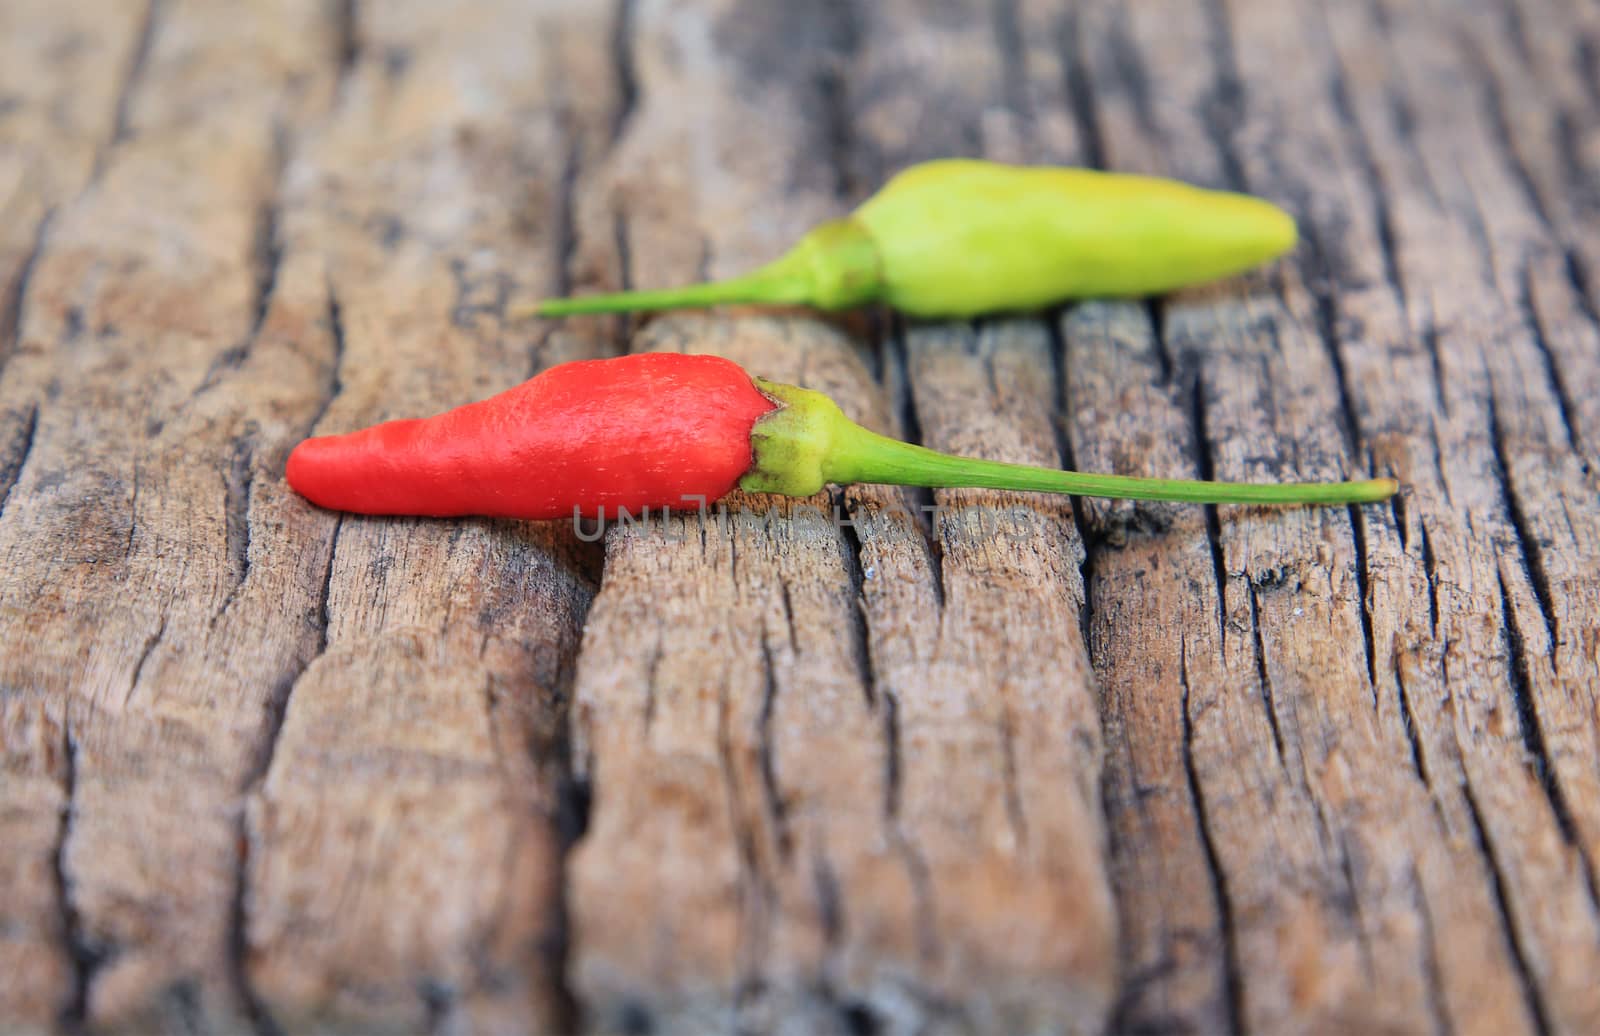 Hot chili pepper on old wooden background